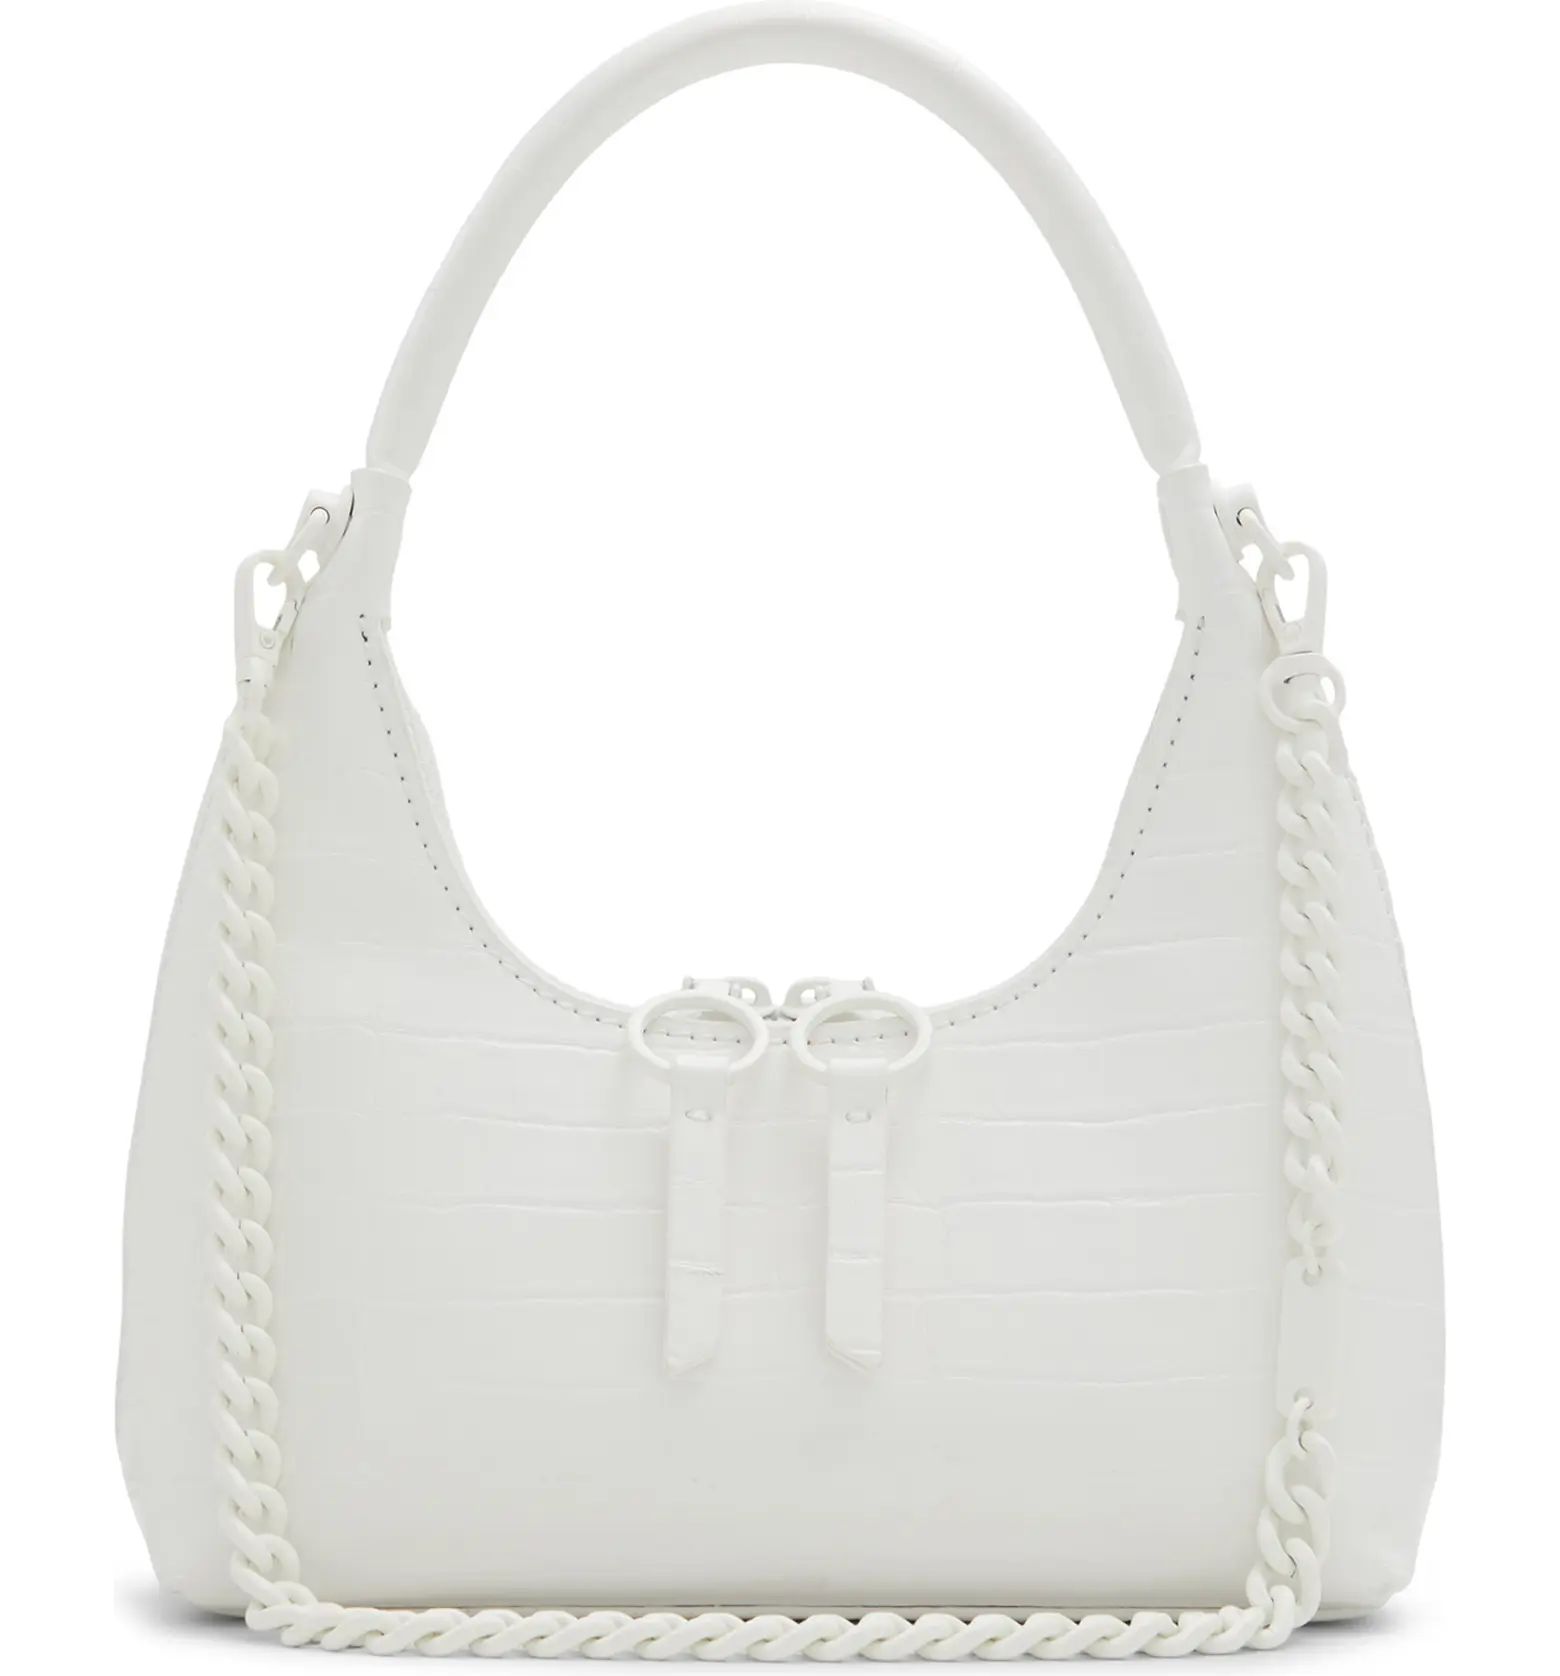 Yvanax Croc Embossed Faux Leather Top Handle Bag | Nordstrom